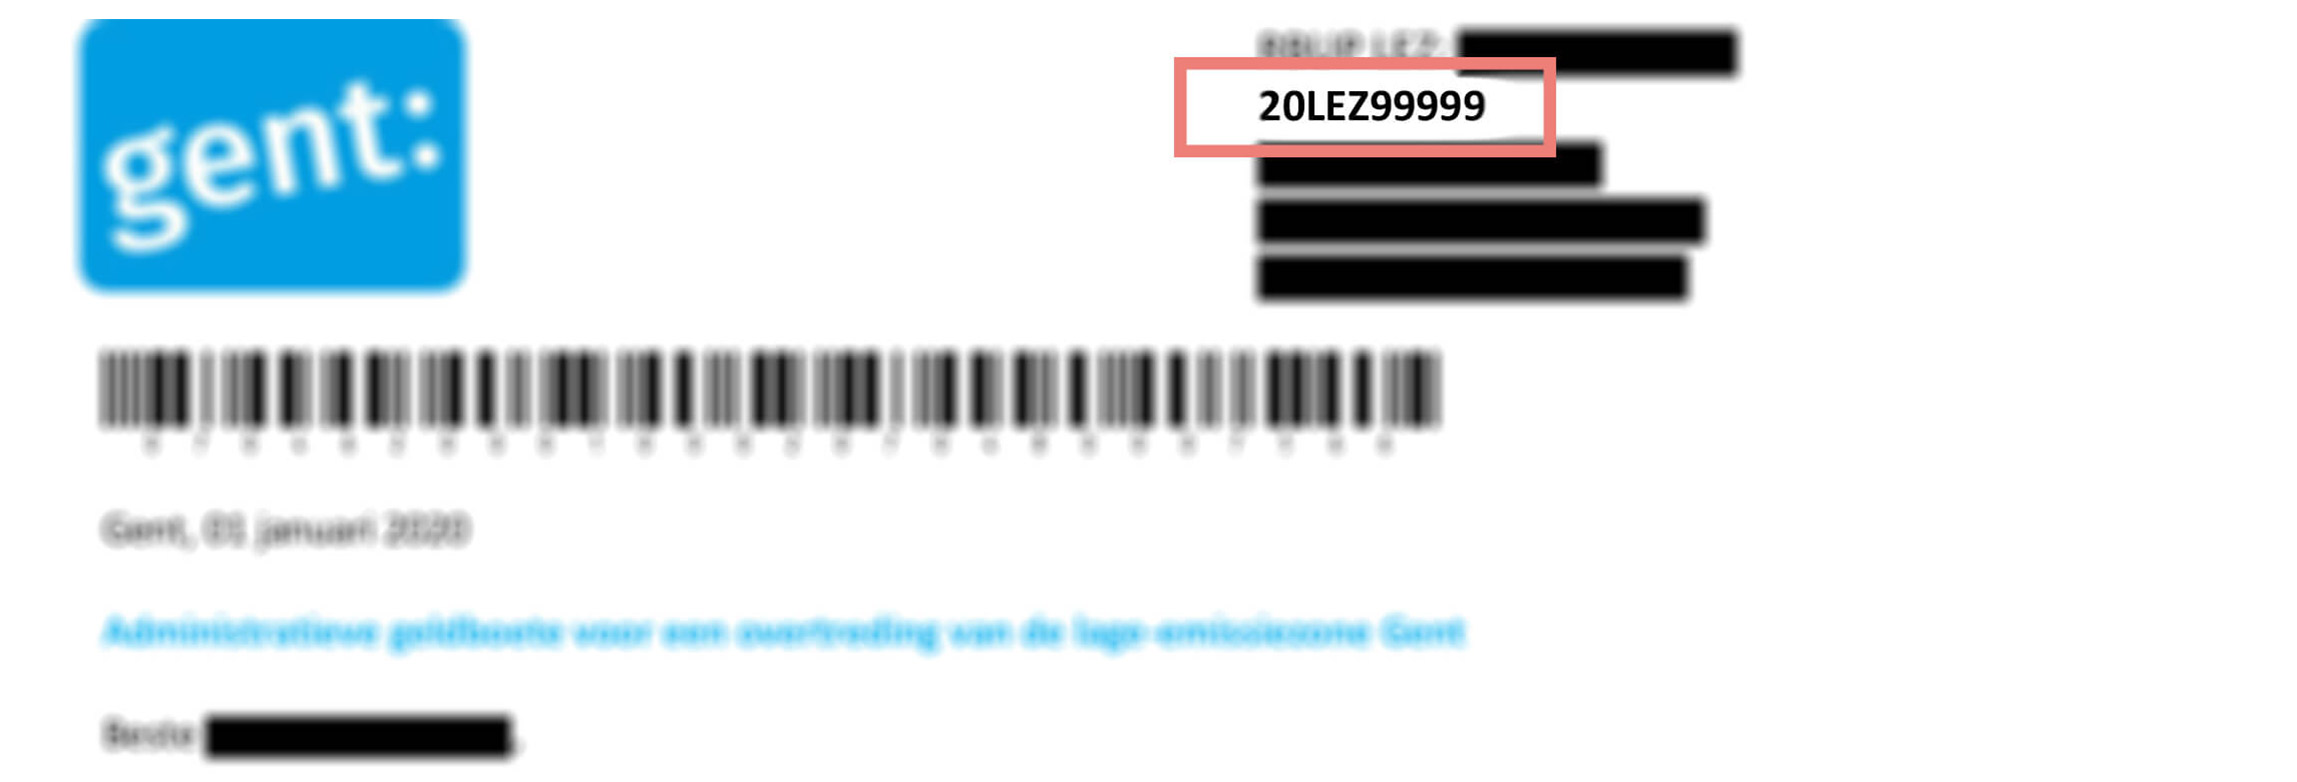 where to find the file number on the payment request